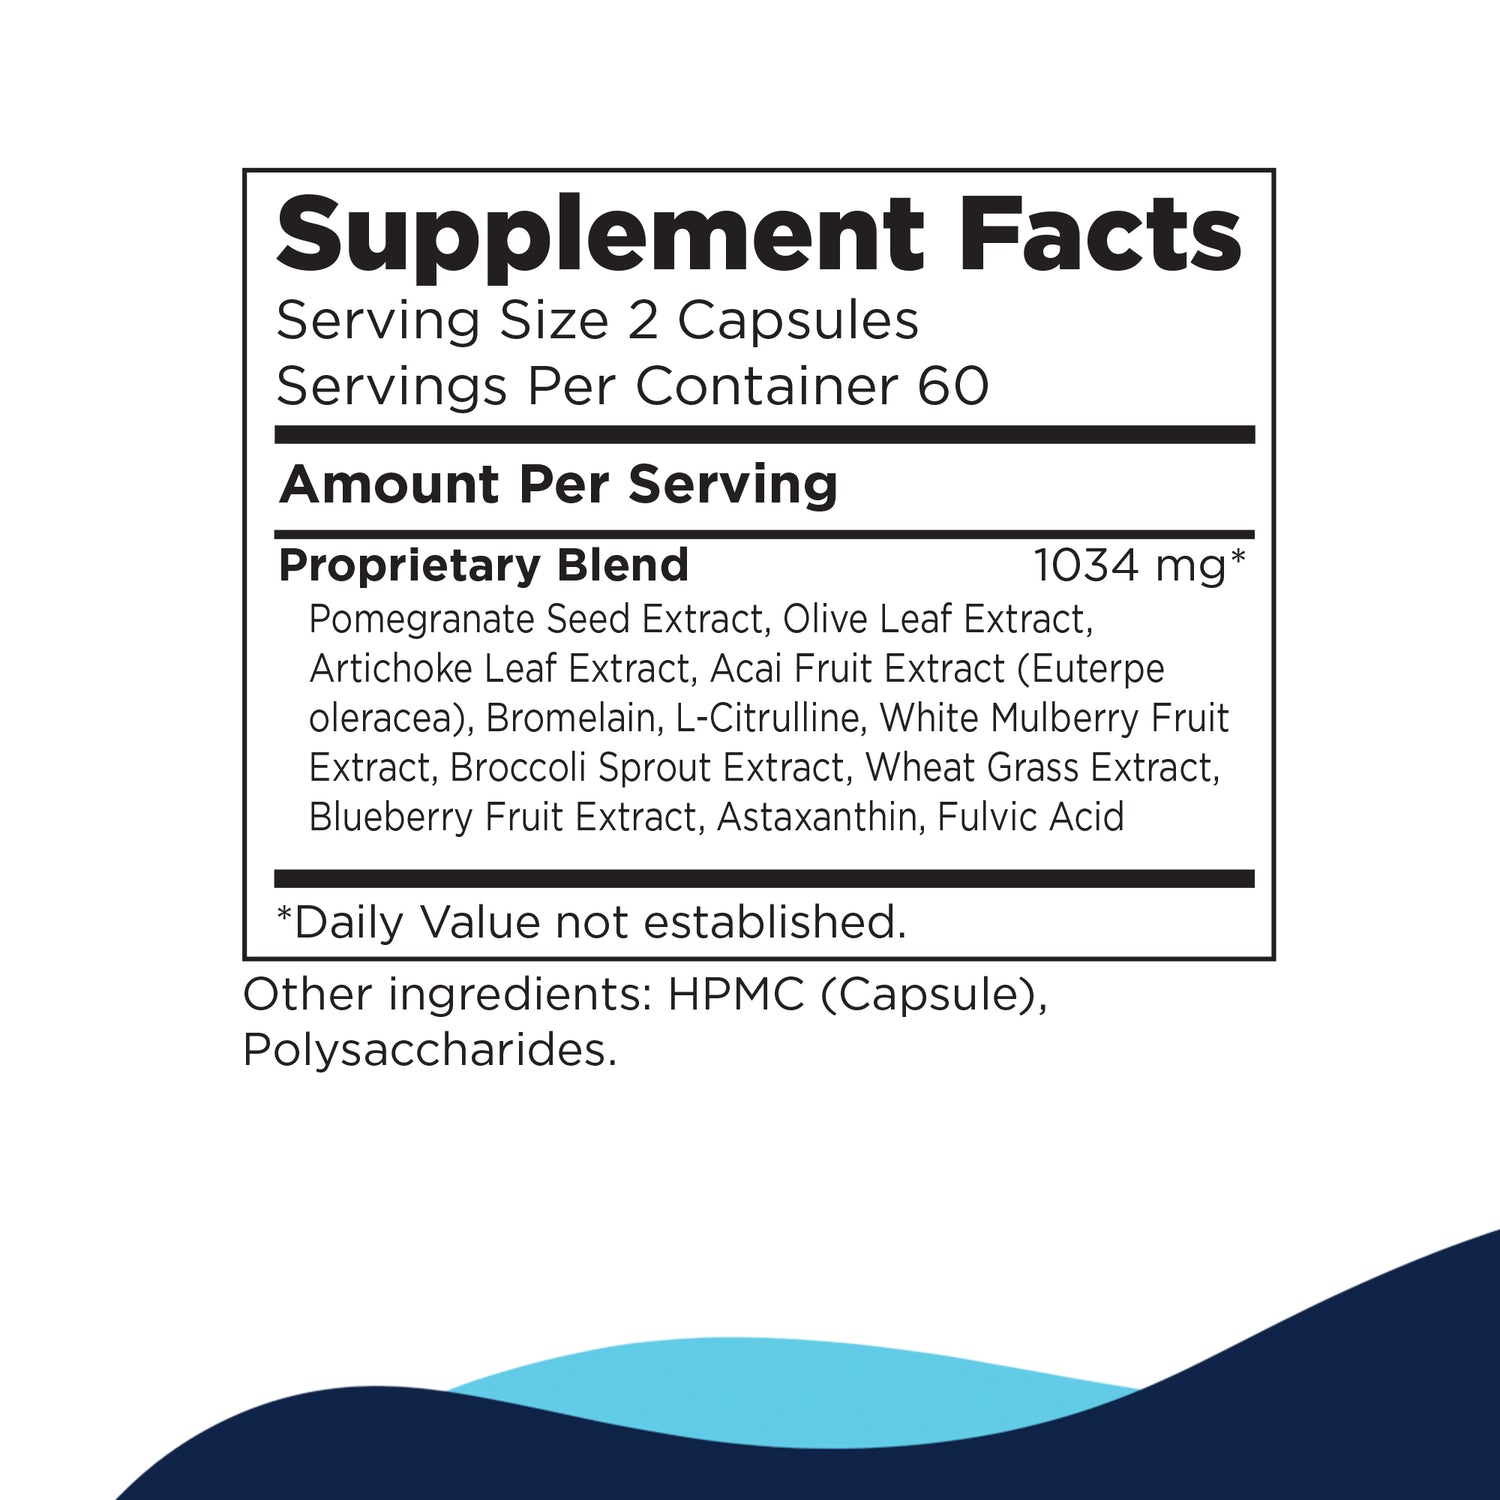 IFC Supplement Facts